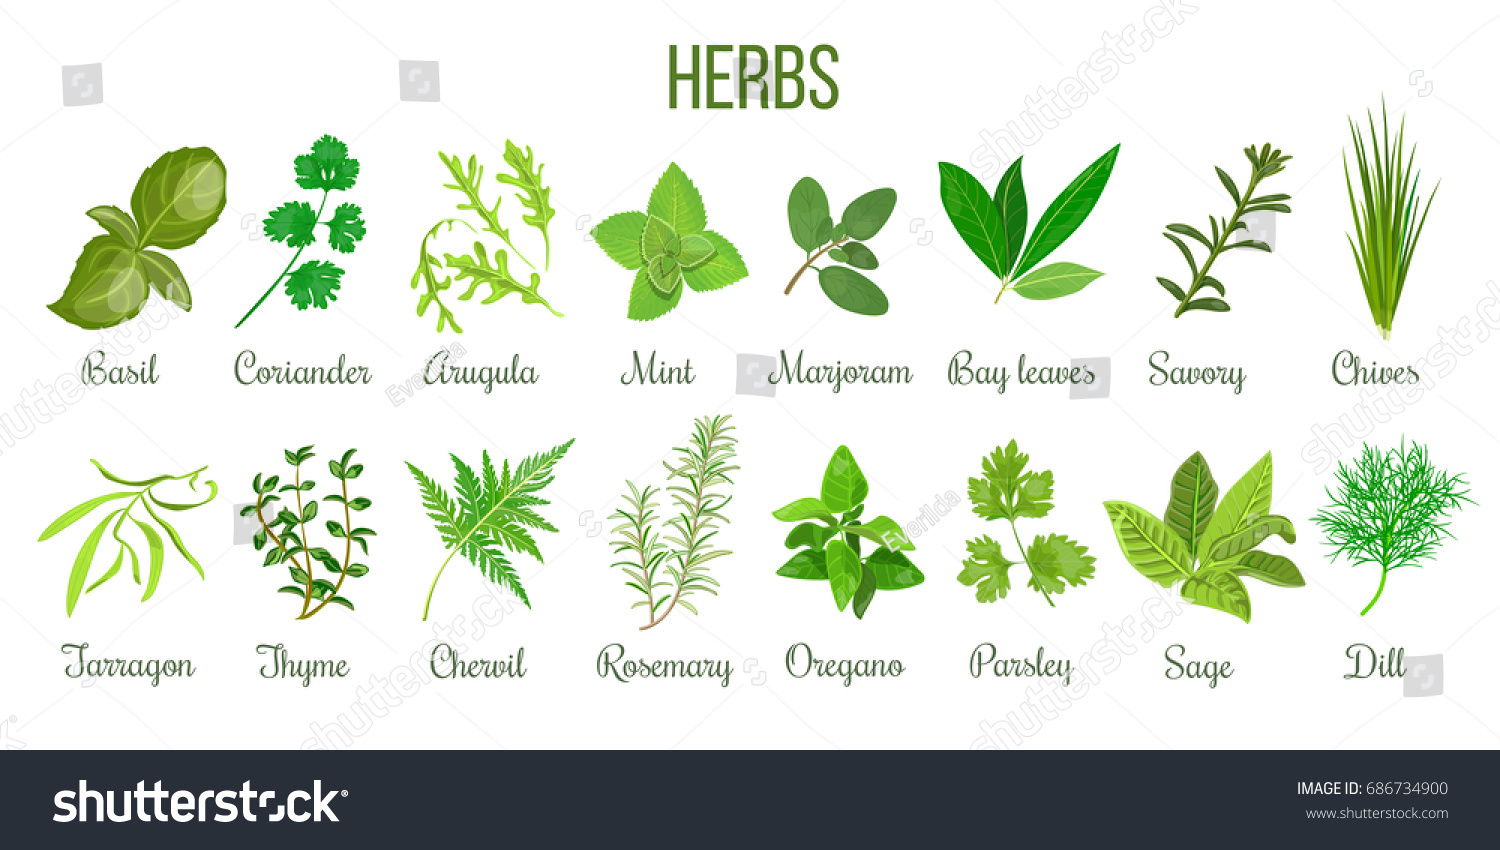 SVG of Big icon set of popular culinary herbs. realistic style. Basil, coriander, mint, rosemary, basil, sage, thyme, parsley etc. For cosmetics, store, health care, tag label, food design svg